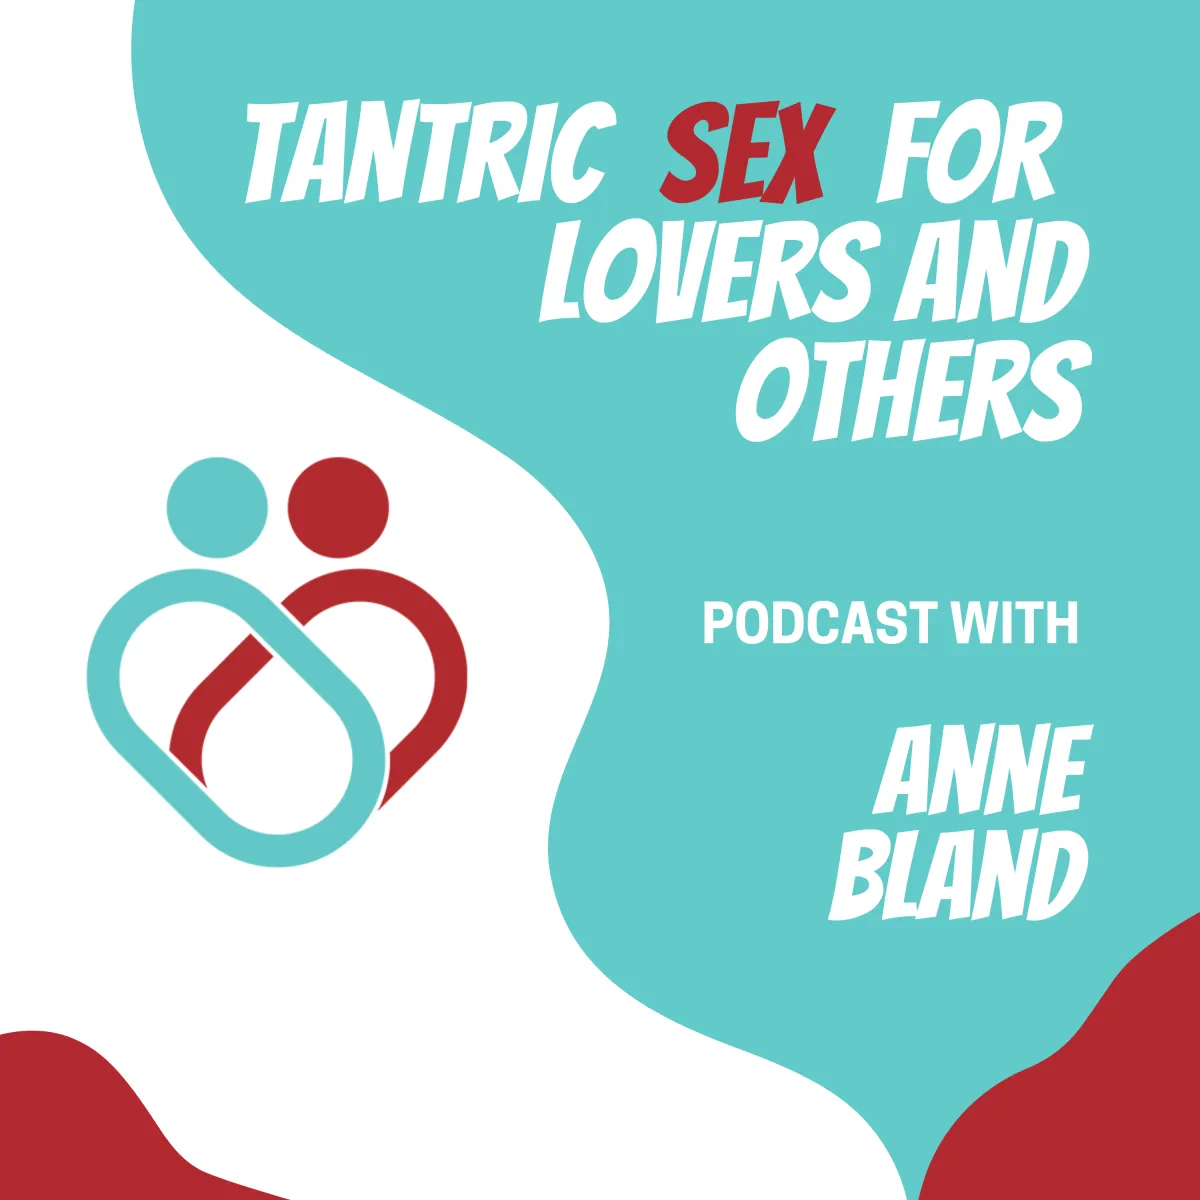 Tantric Sex for Lovers and Others podcast logo with teal and red 